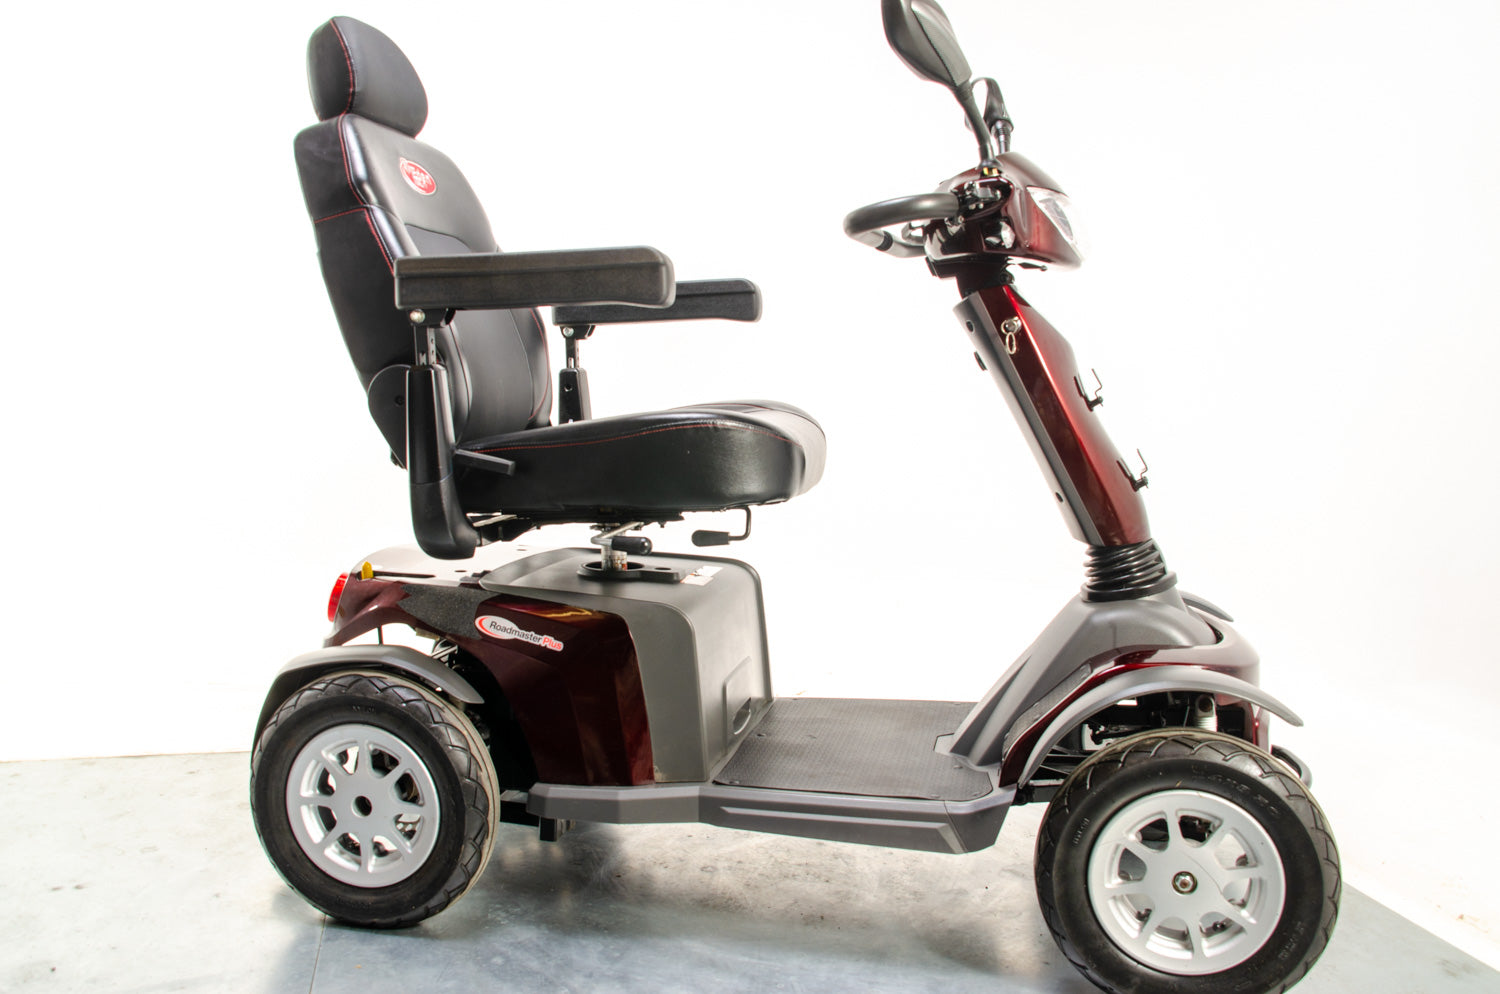 Products Eden Roadmaster Plus All-Terrain Off-Road Used Mobility Scooter 8mph Luxury Electric Large 2019